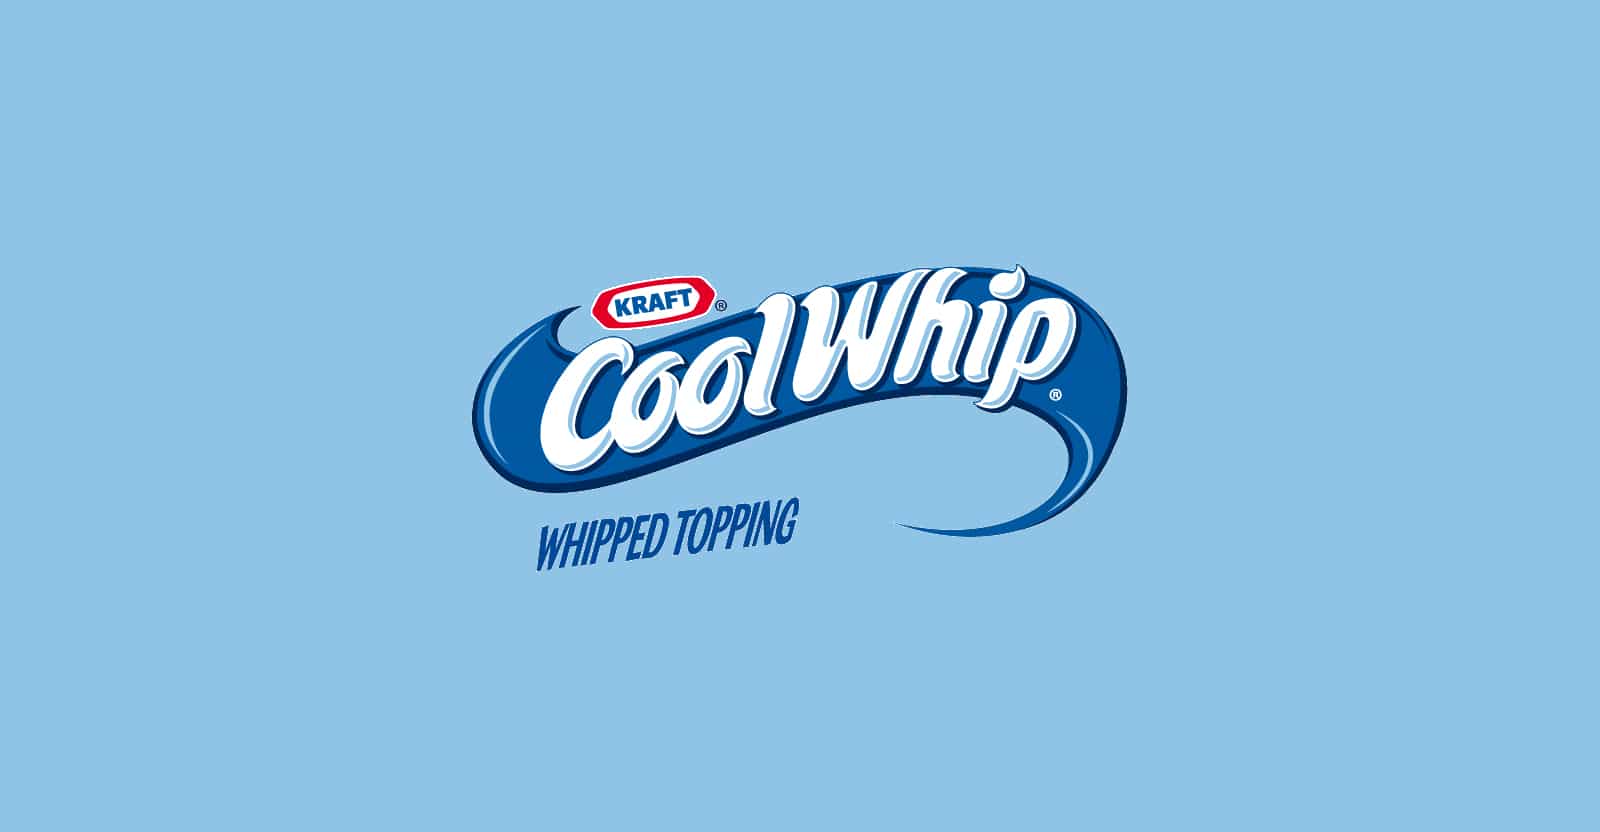 is cool whip gluten-free